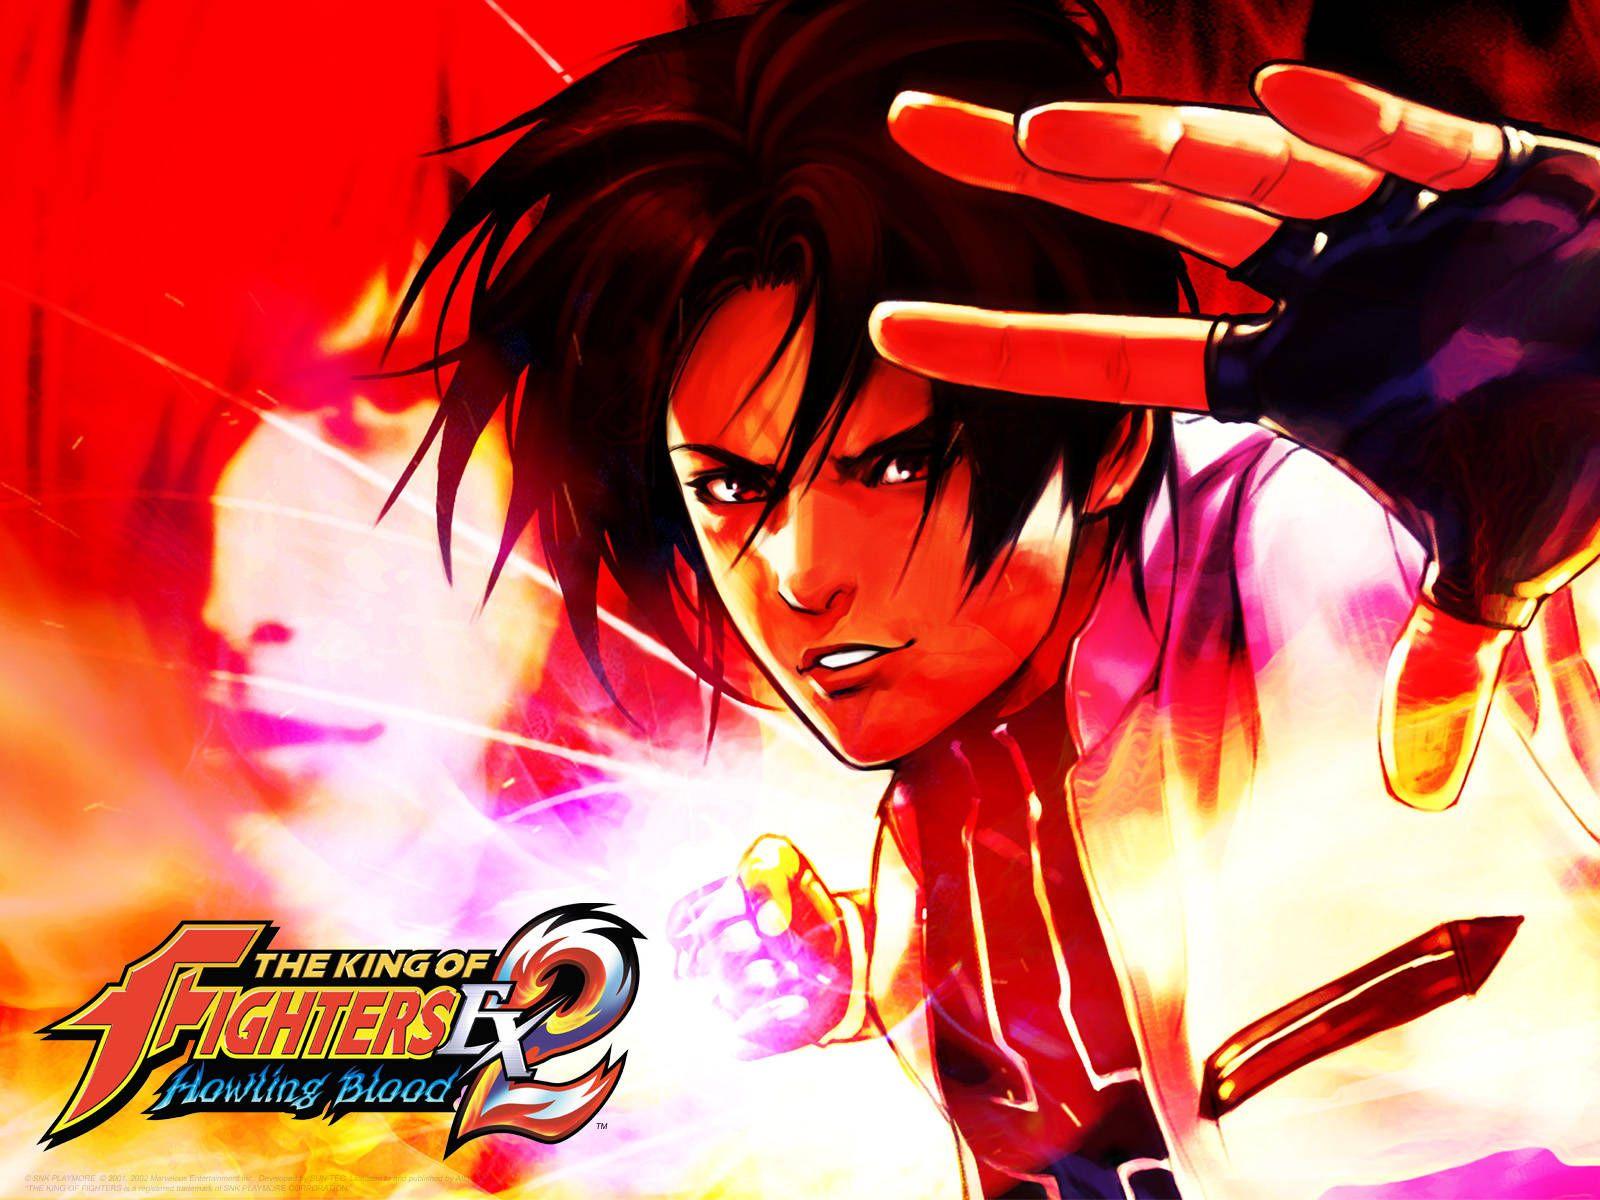 The King of Fighters screenshots, image and picture